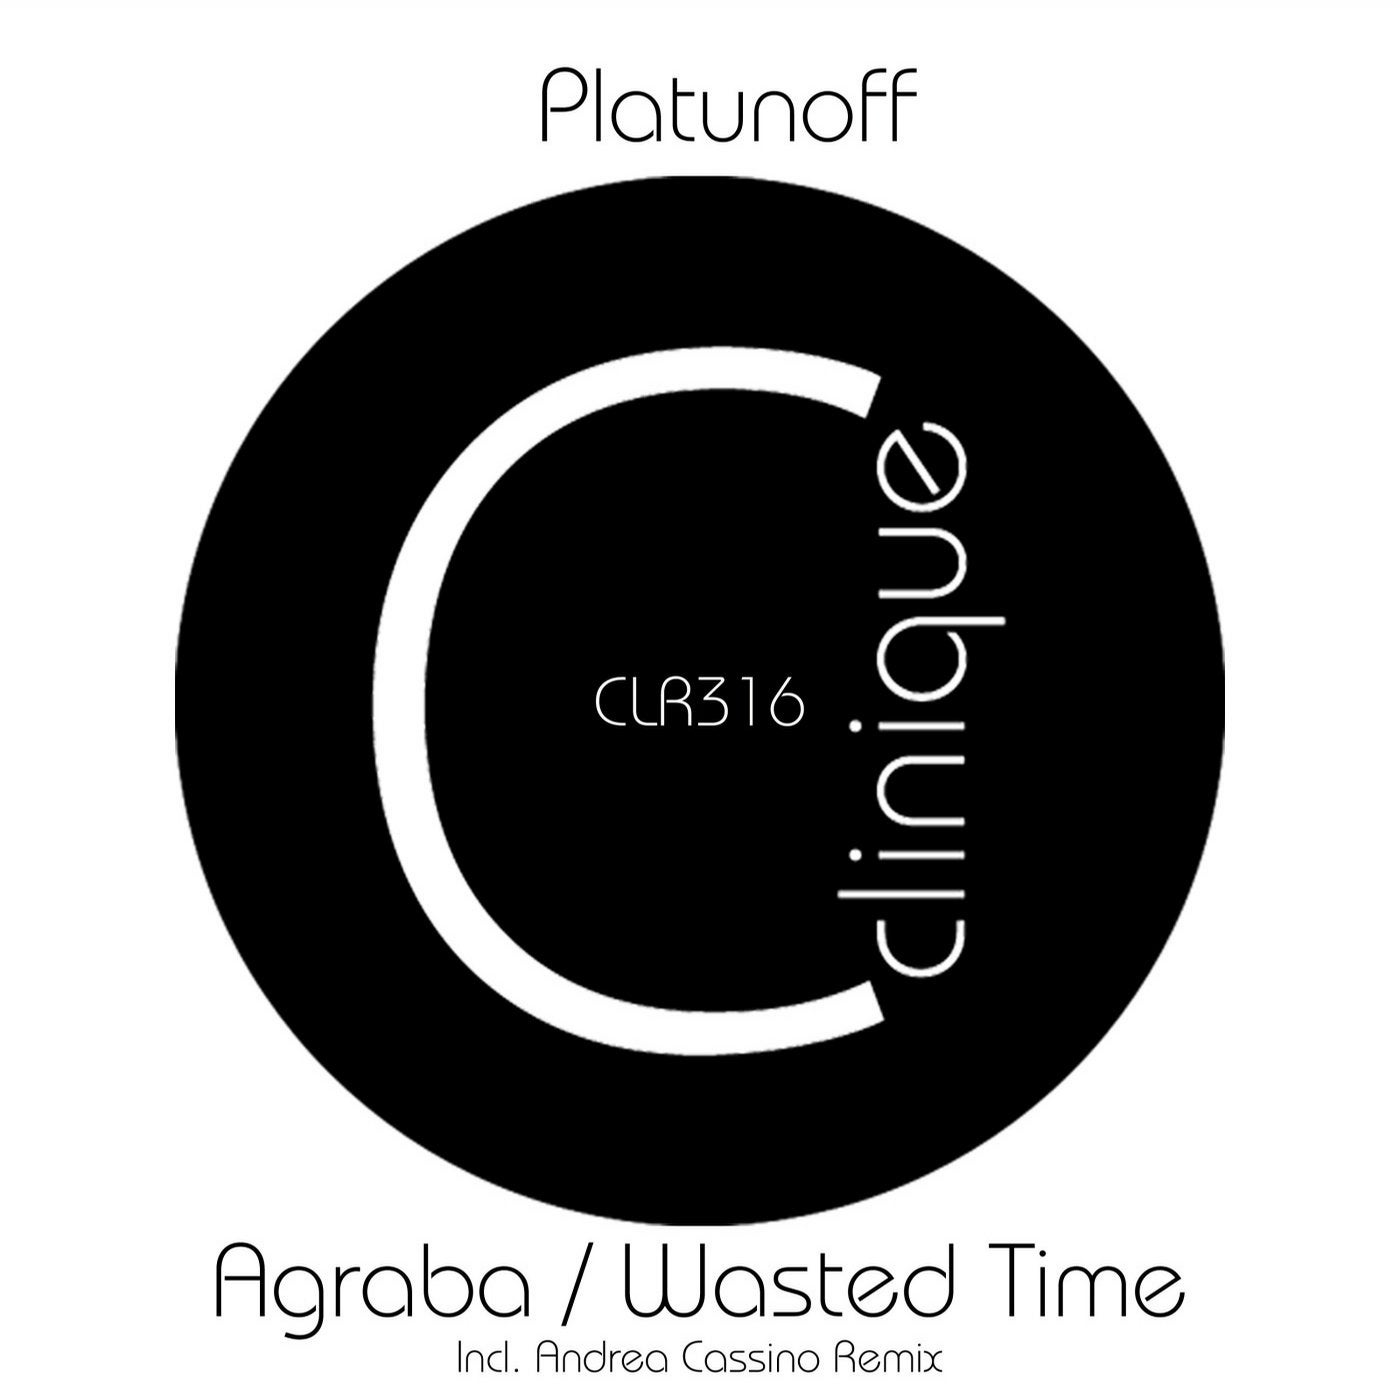 Agraba / Wasted Time